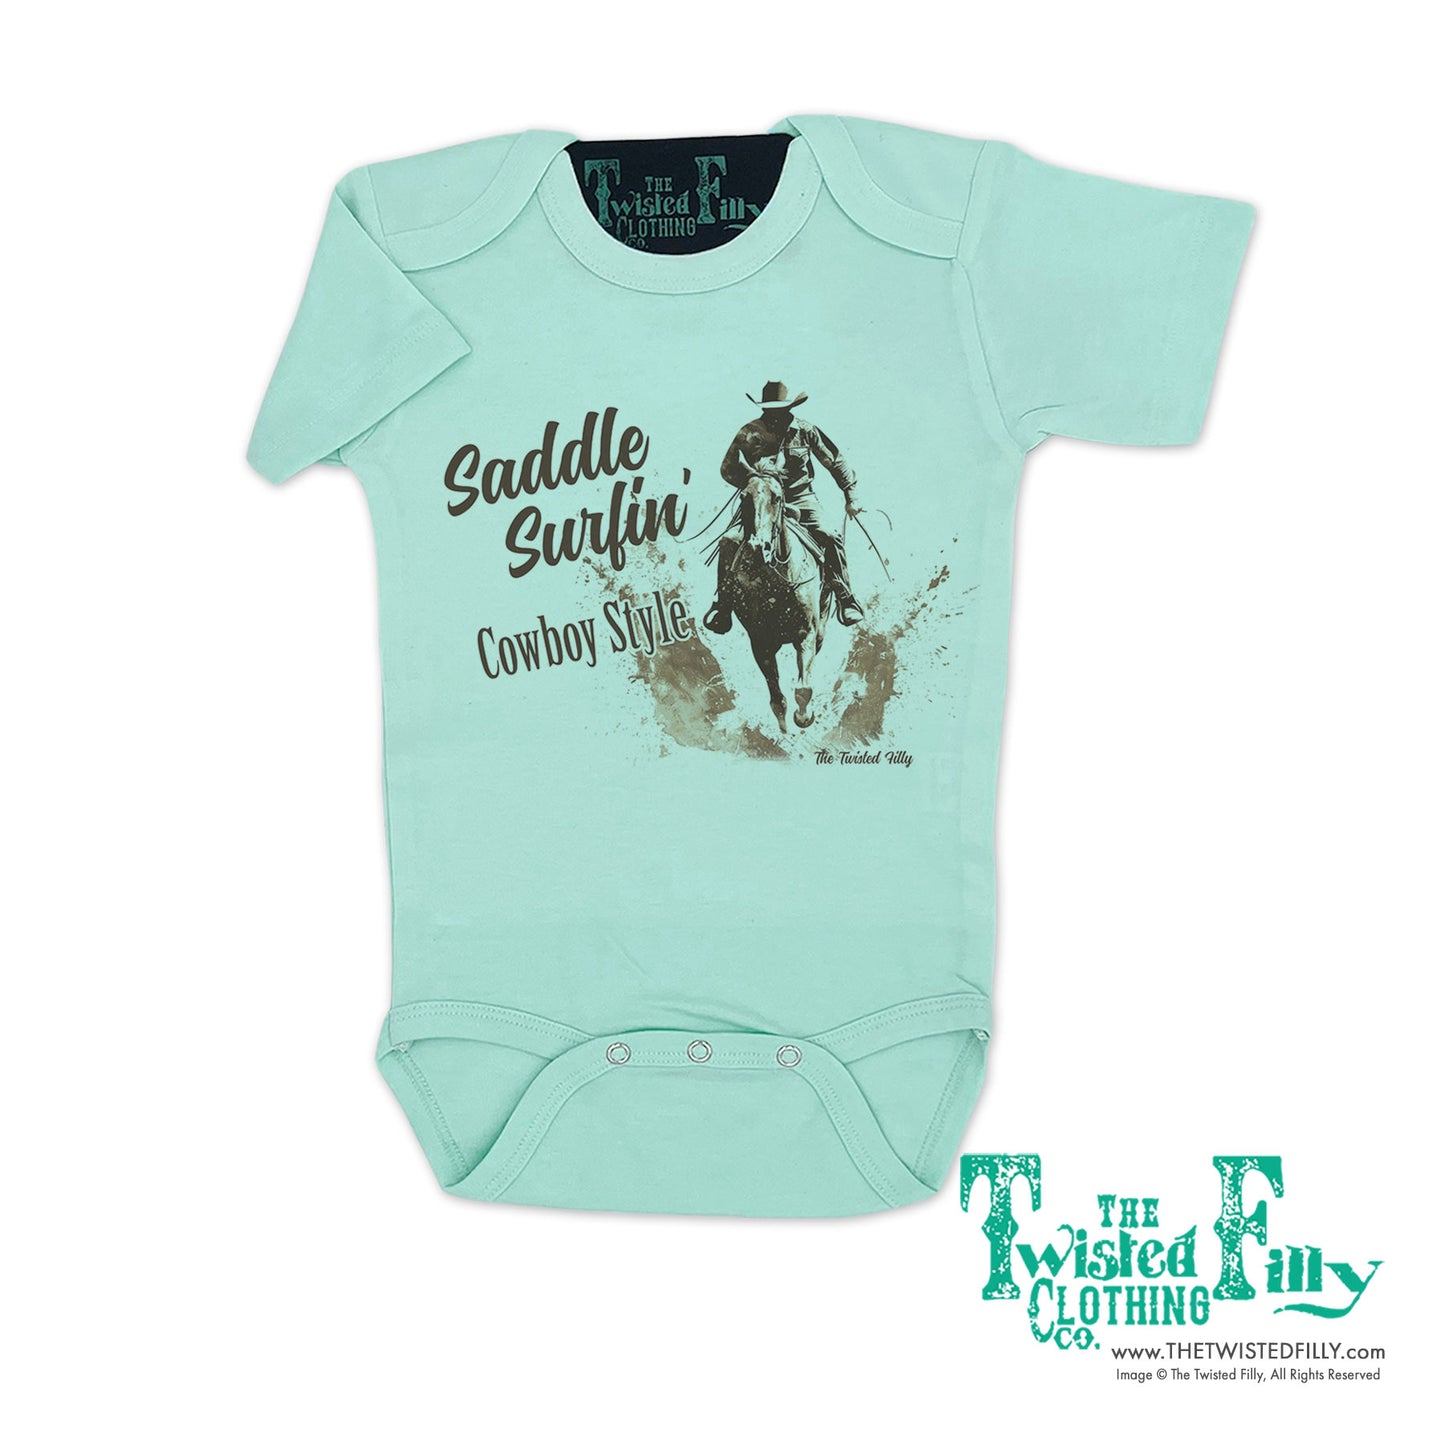 Saddle Surfin' Cowboy Style - S/S Boys Infant One Piece - Assorted Colors